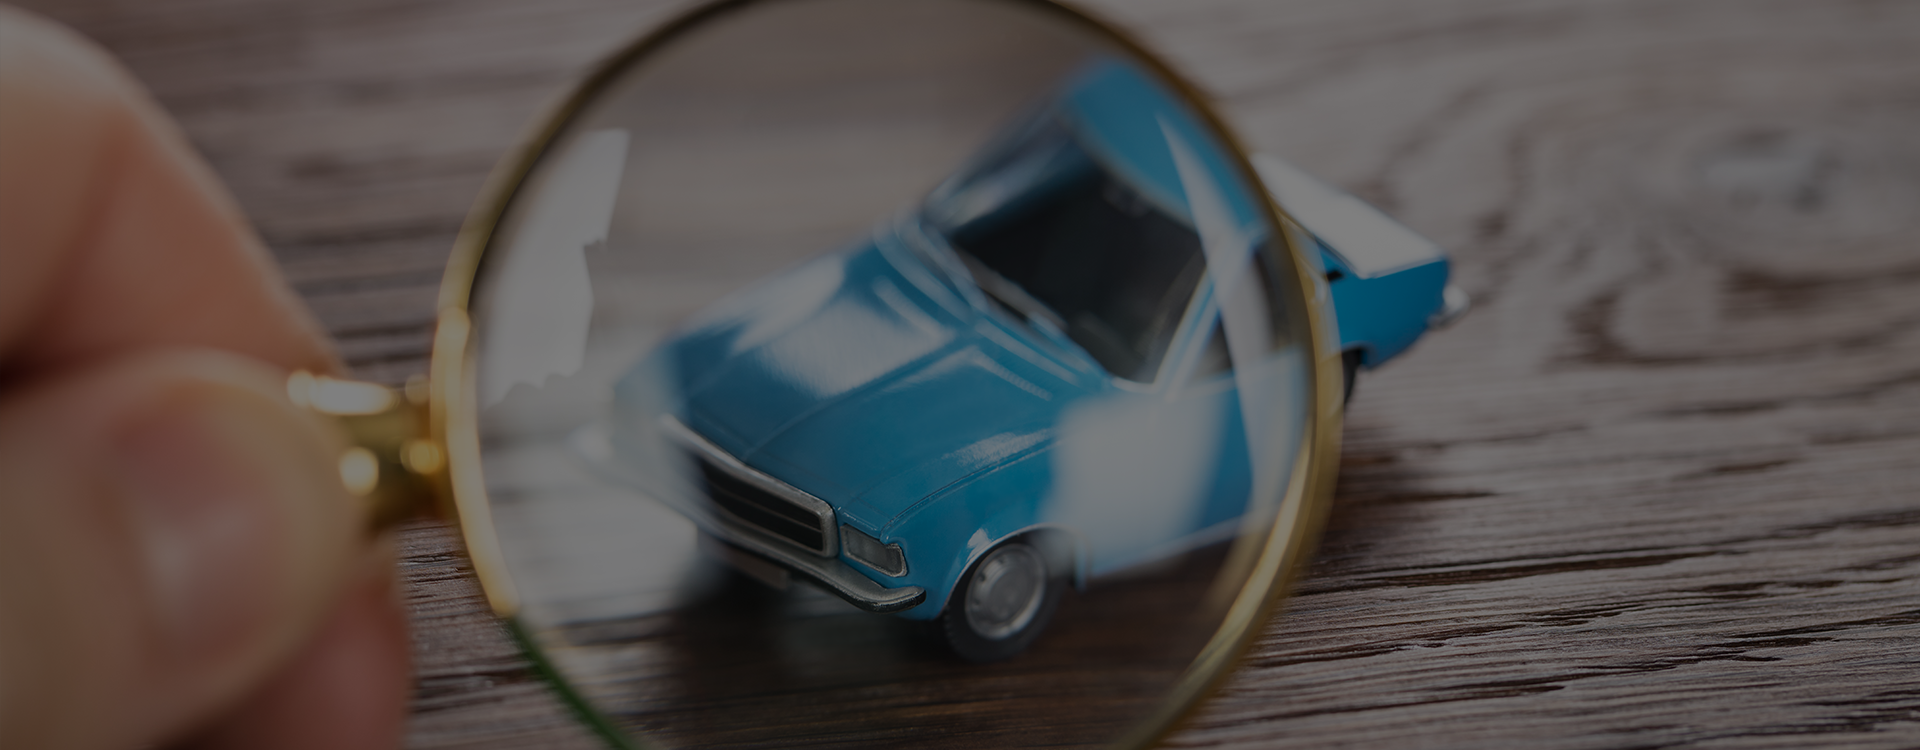 Google Ads: Automotive Search Volume Interest and 3 Major Trends of 2020